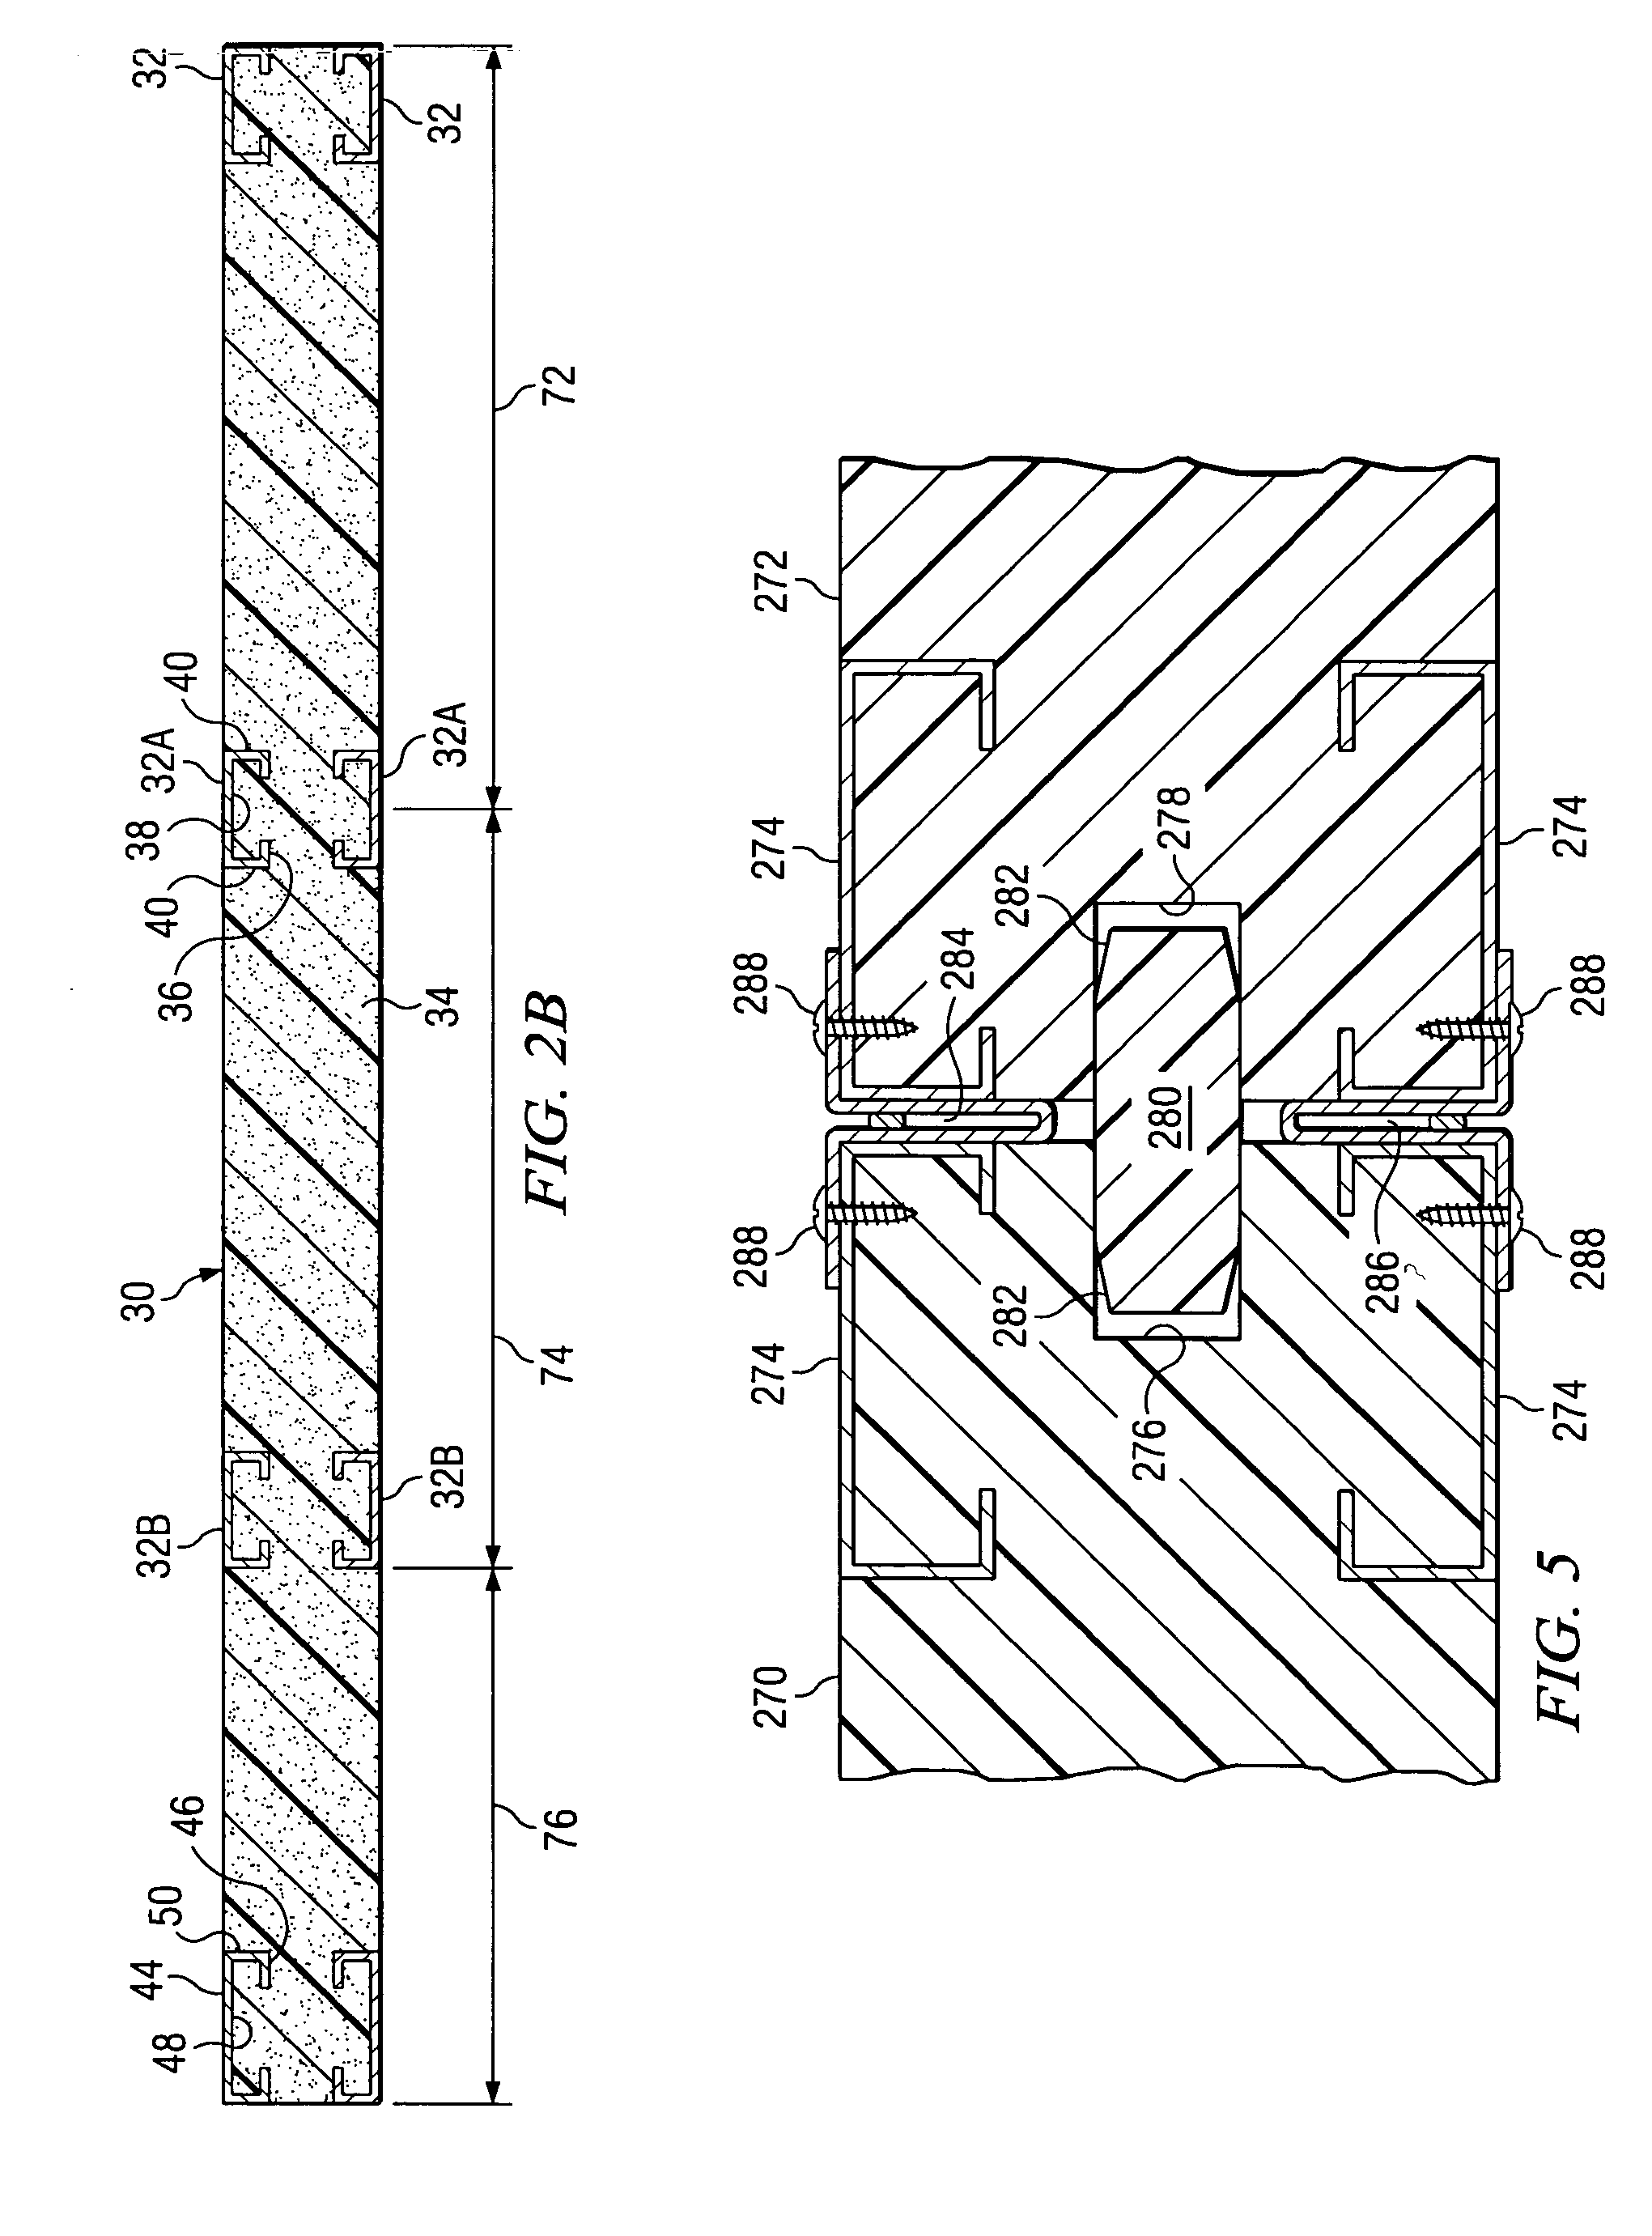 Insulated structural building panel and assembly system